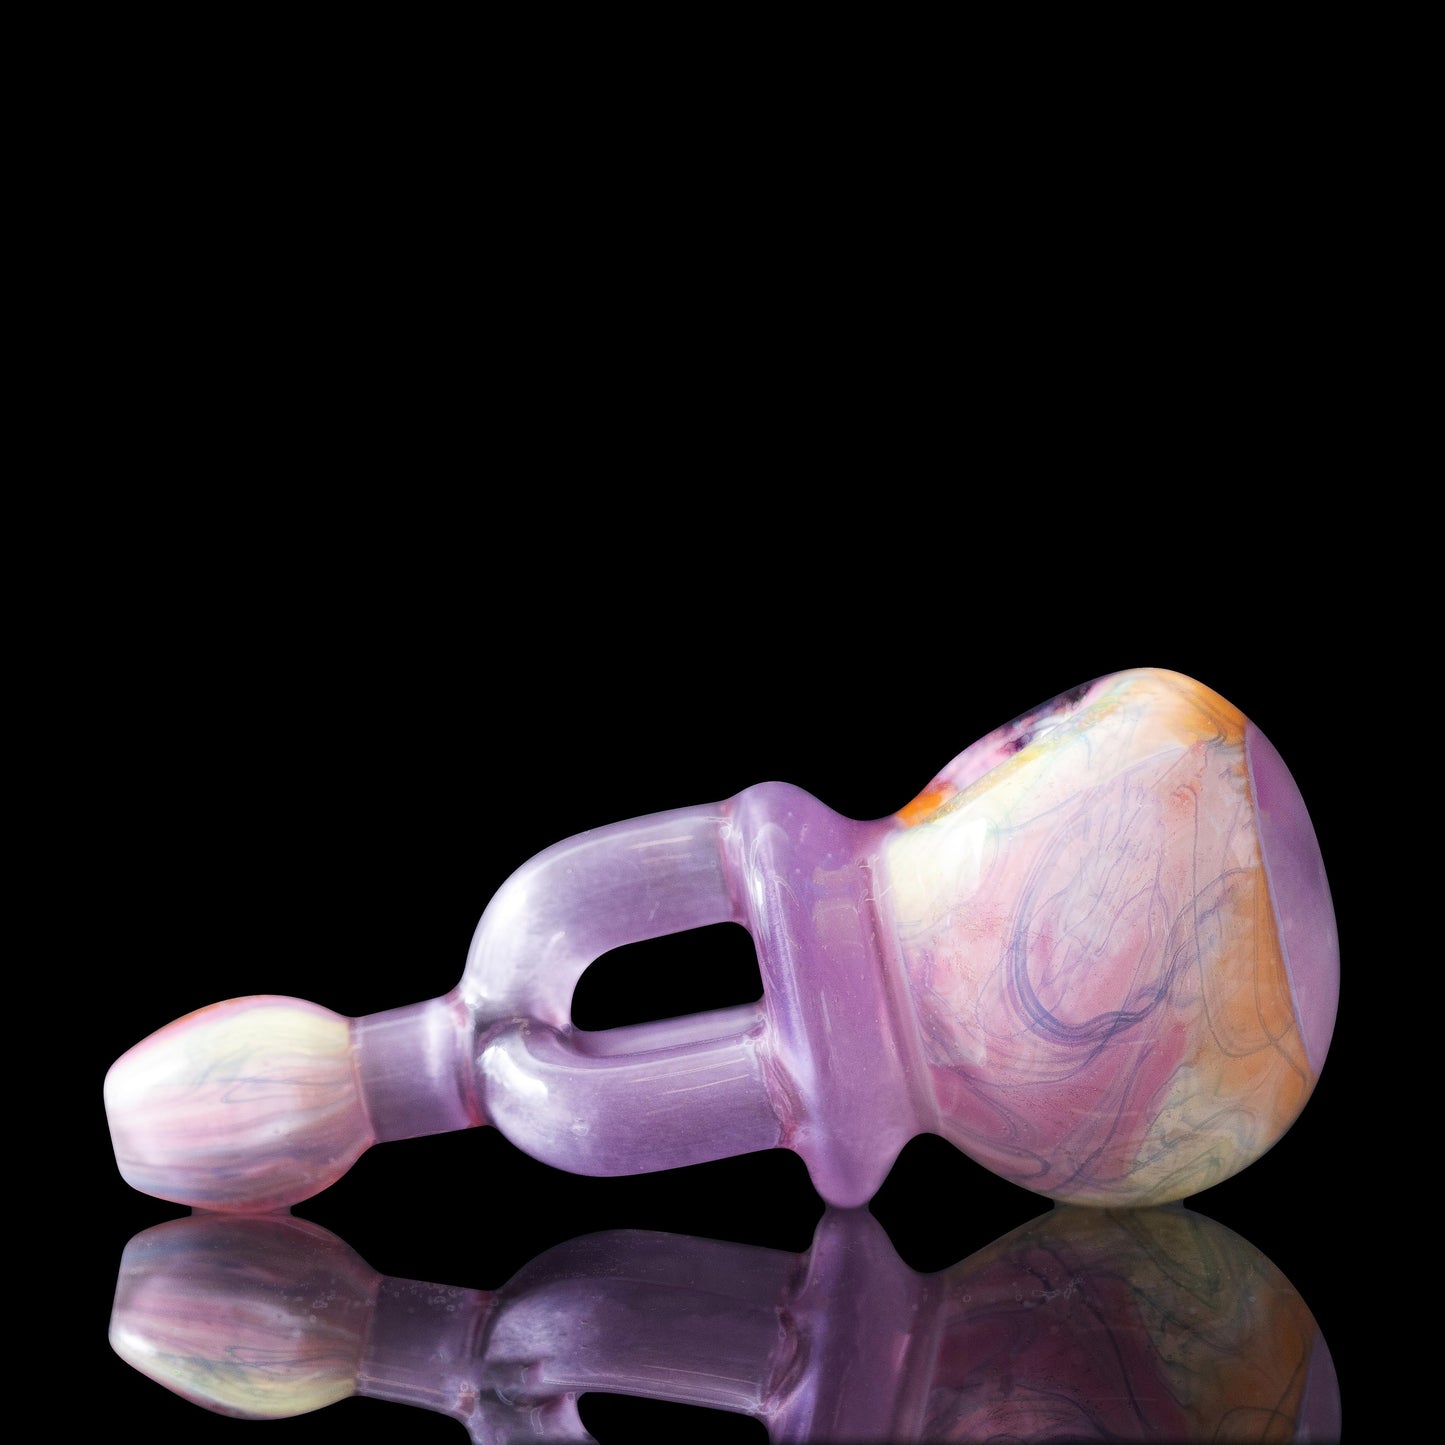 Collab Dry Pipe by Not A Pipe Maker x Scomo Moanet (Scribble Season 2022)